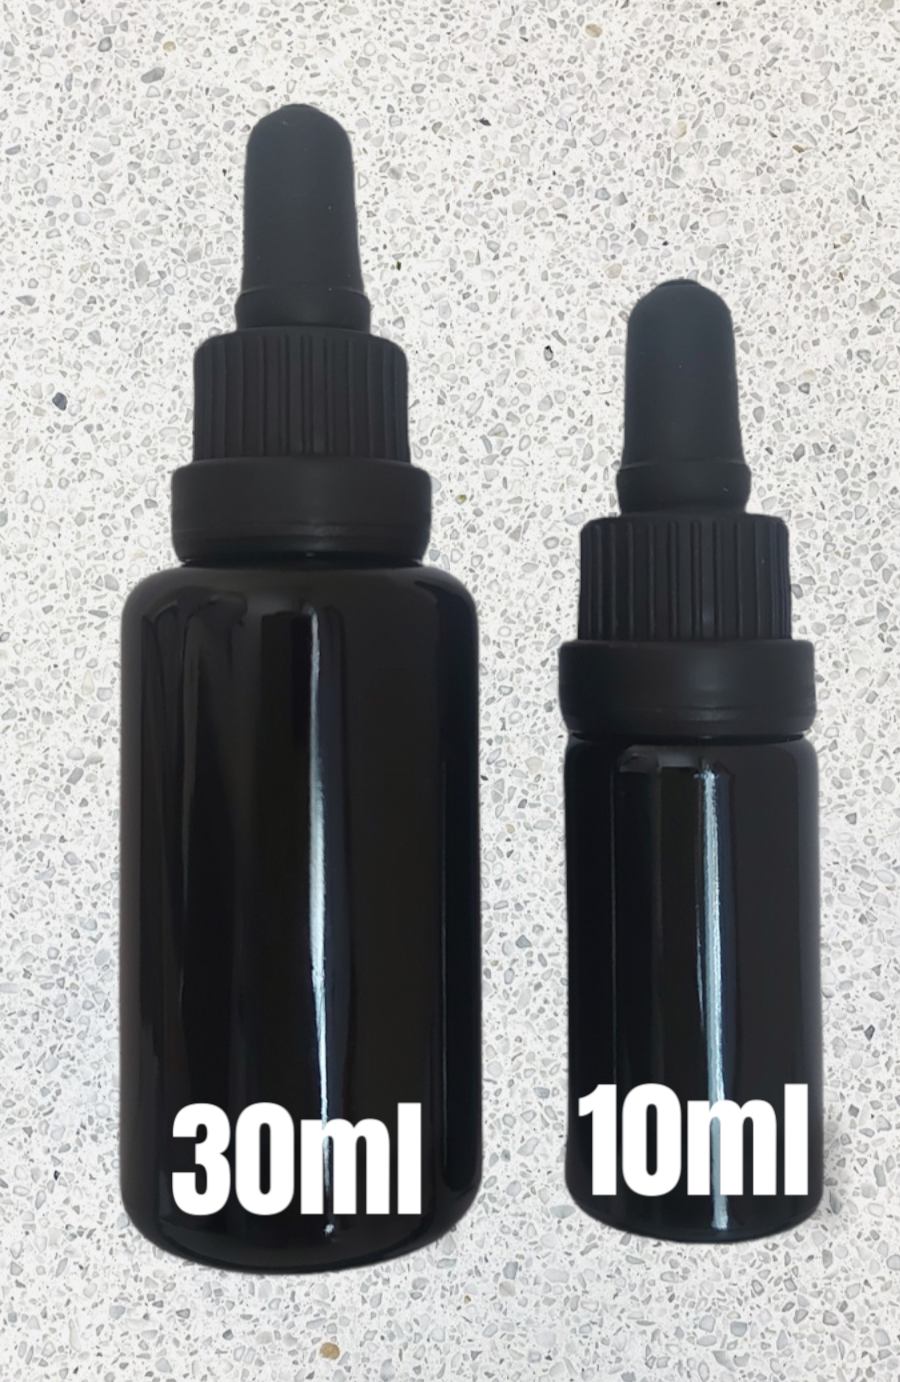 2 bottles showing size comparison 10ml and 30ml